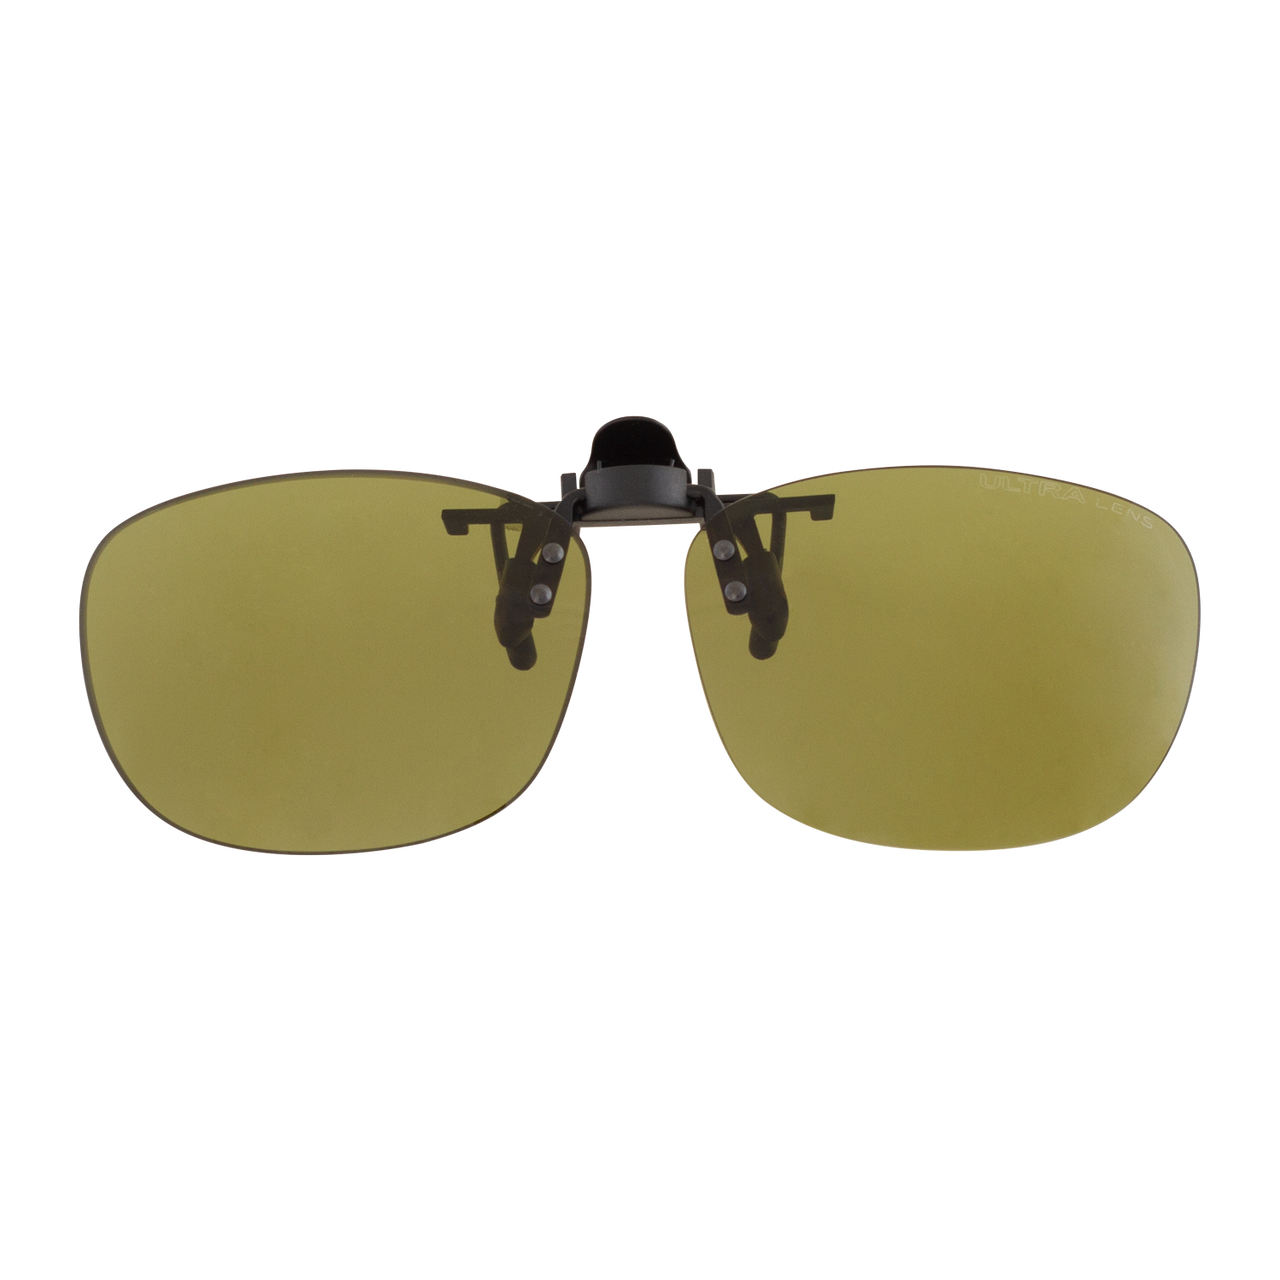 CLIP ON CP30-0068 LGRN Polarized ULTRA light green,Opt2, large image number 0